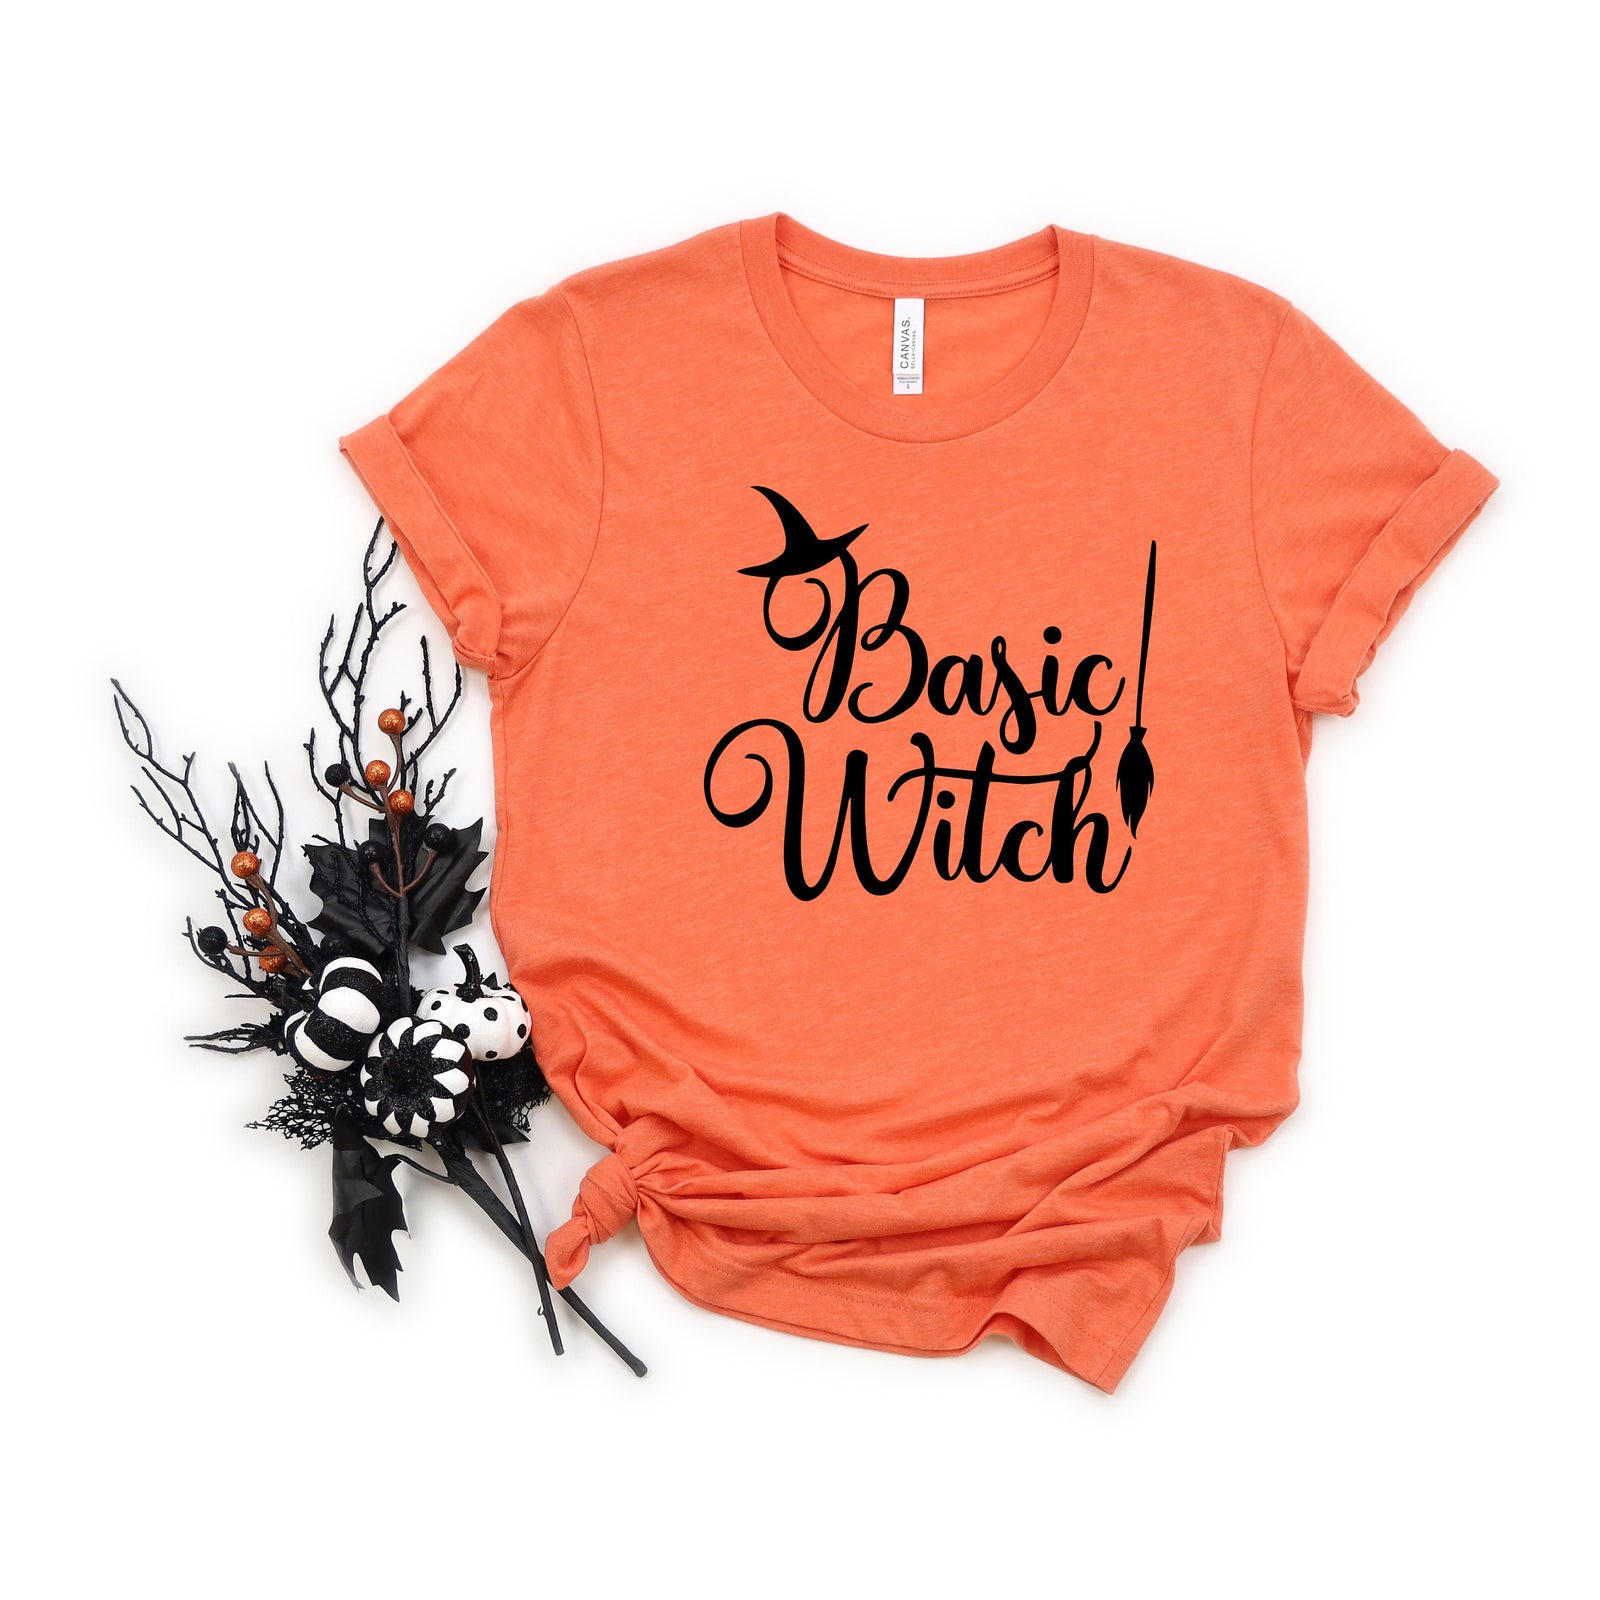 Basic Witch Adult T Shirt - Halloween - Funny Not So Scary Witch Hat